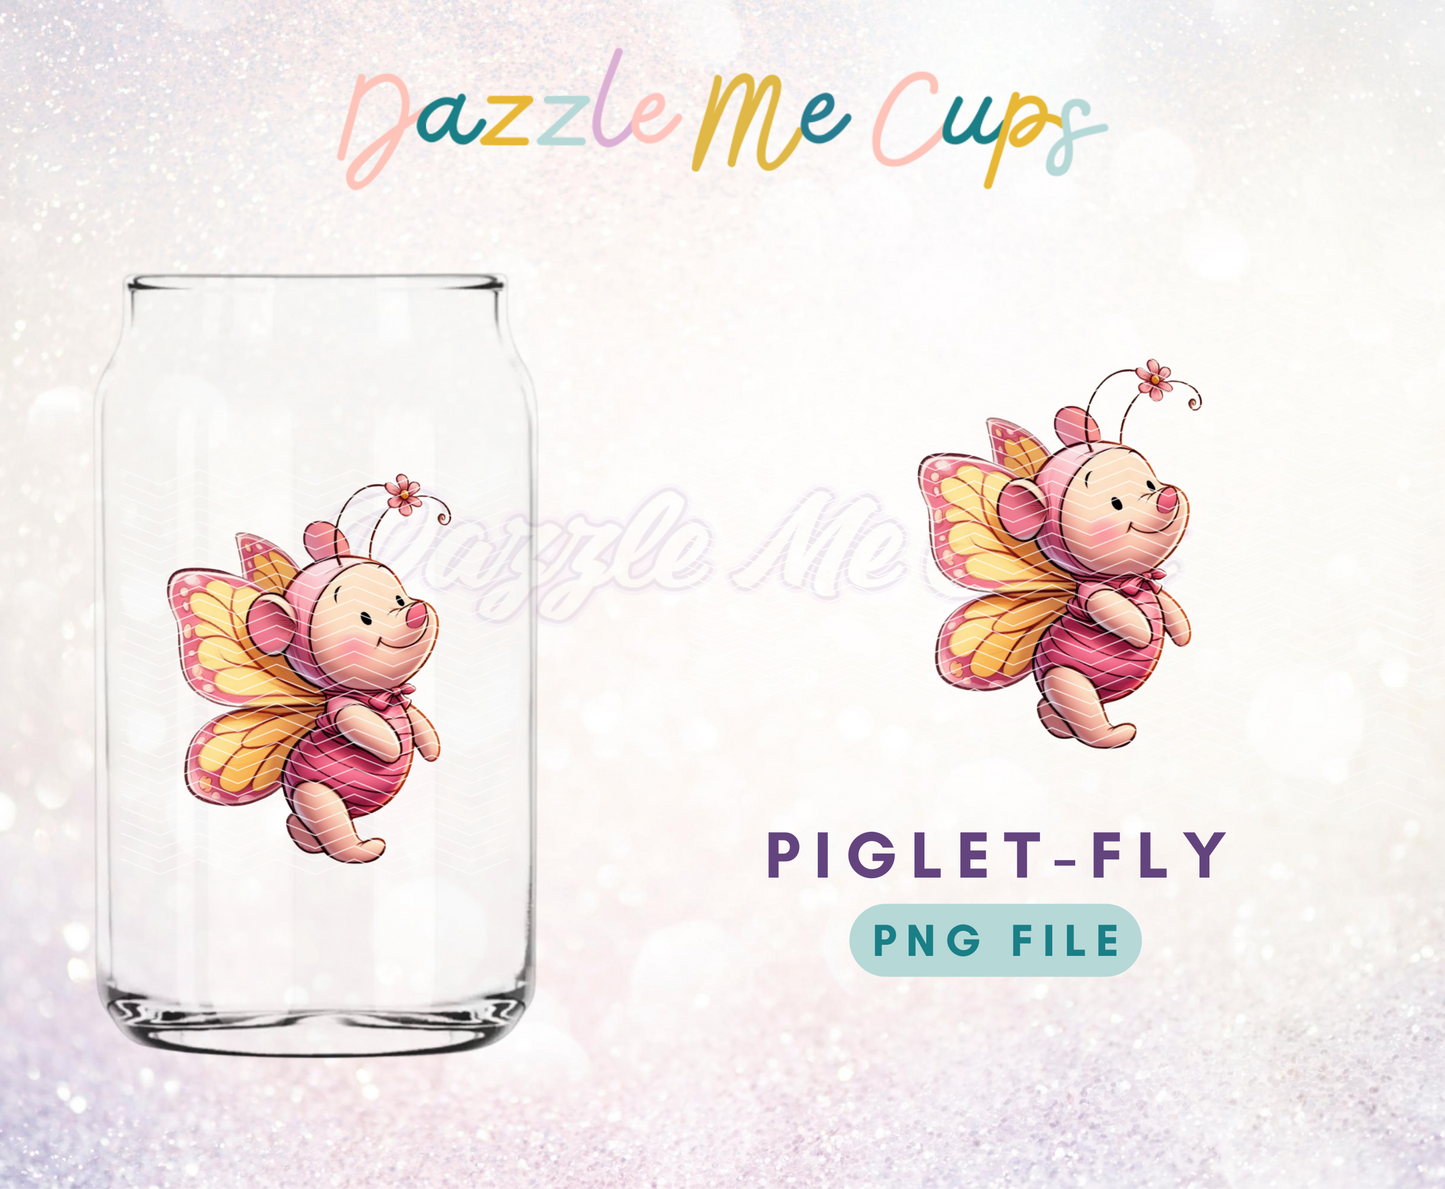 piggy-fly PNG